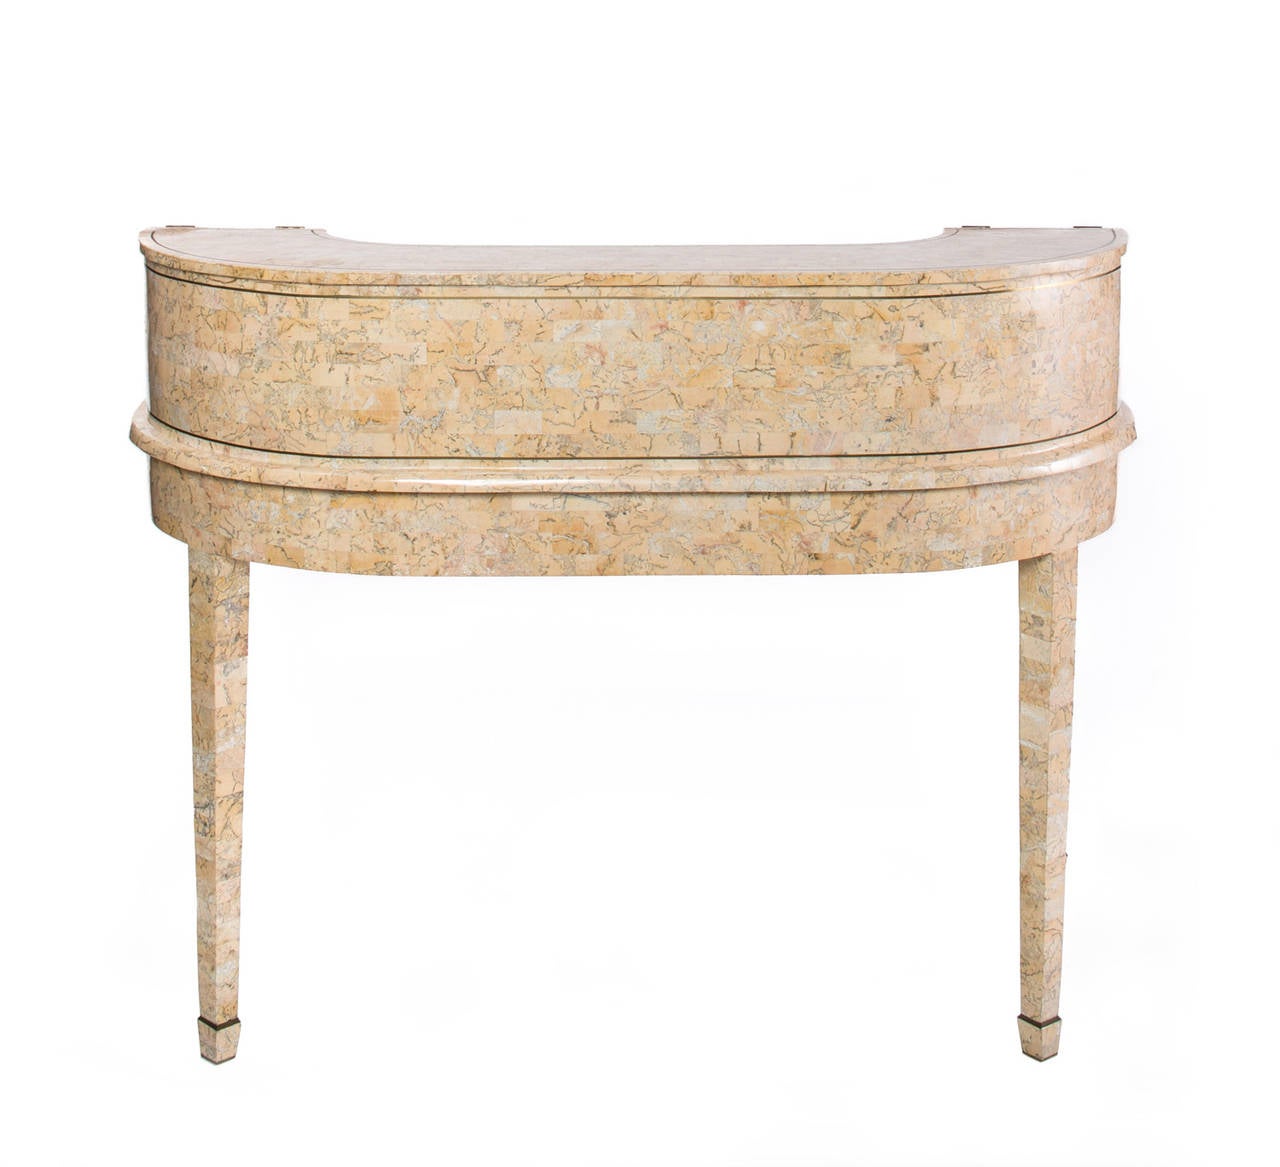 French Peach Marble Tiled Mahogany Desk For Sale